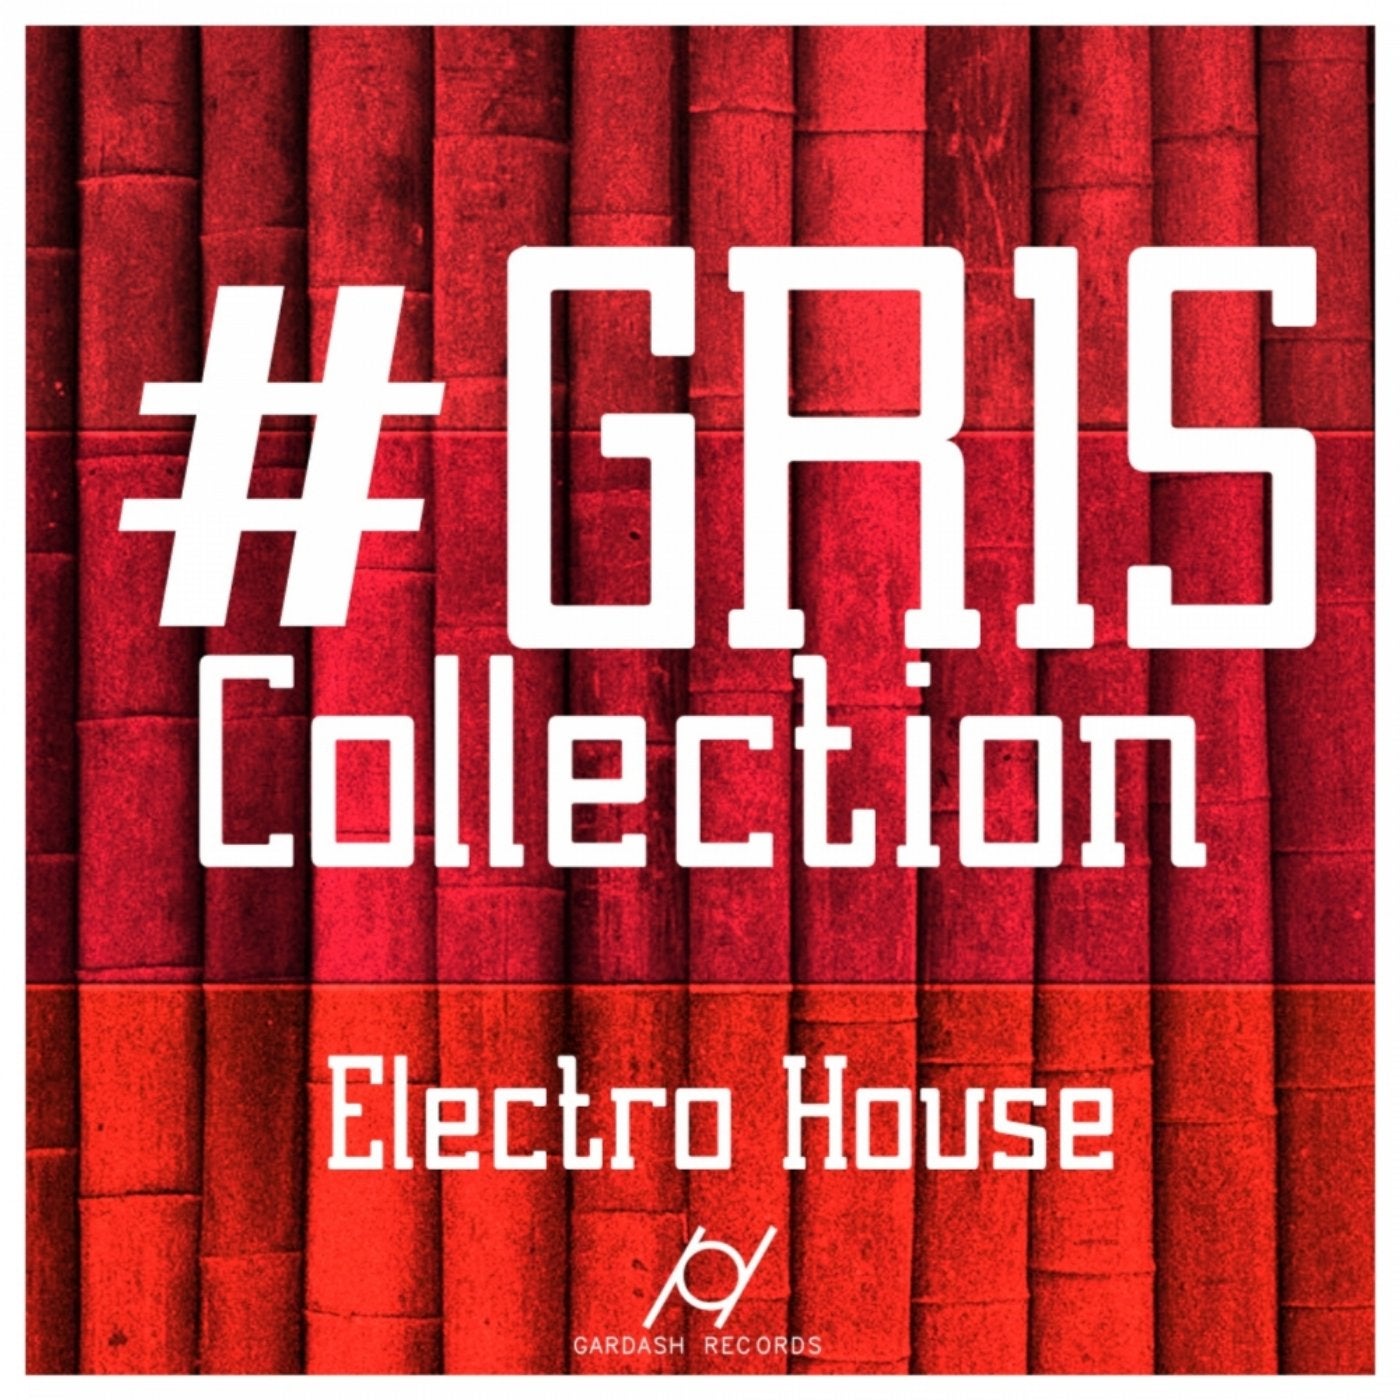 GR 15 Collection Electro House